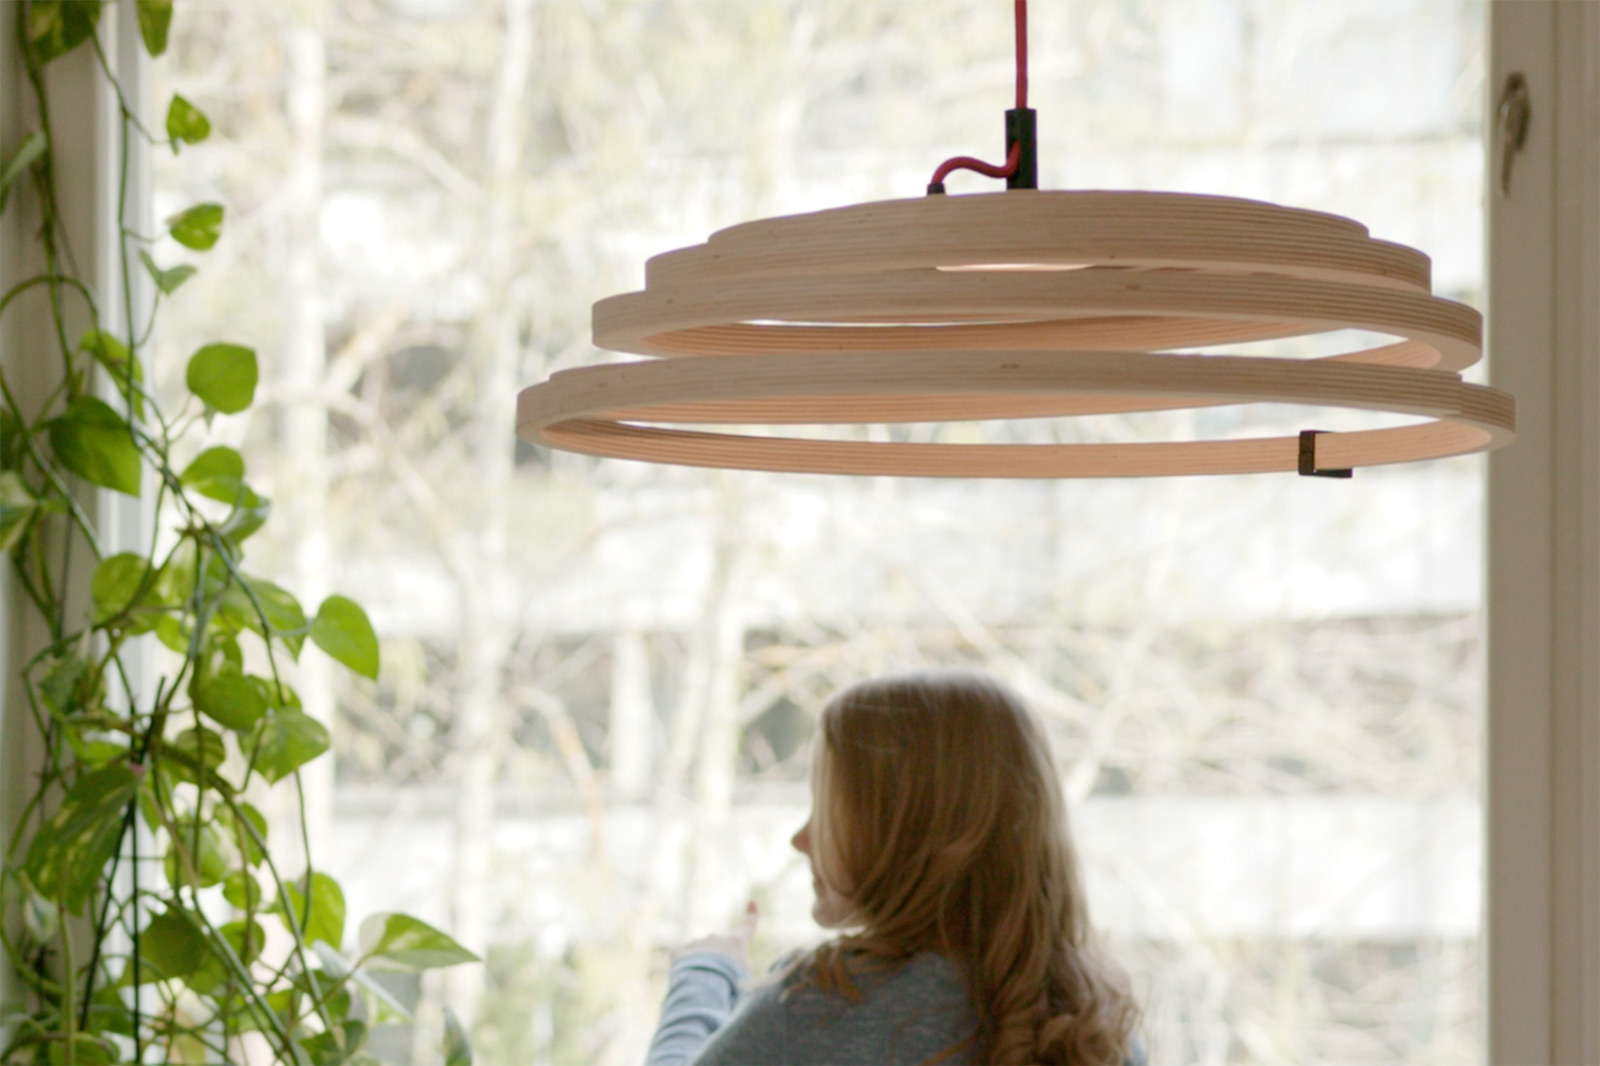 The Aspiro pendant lamp hanging in front of a window. A girl in the background looks out of the window.